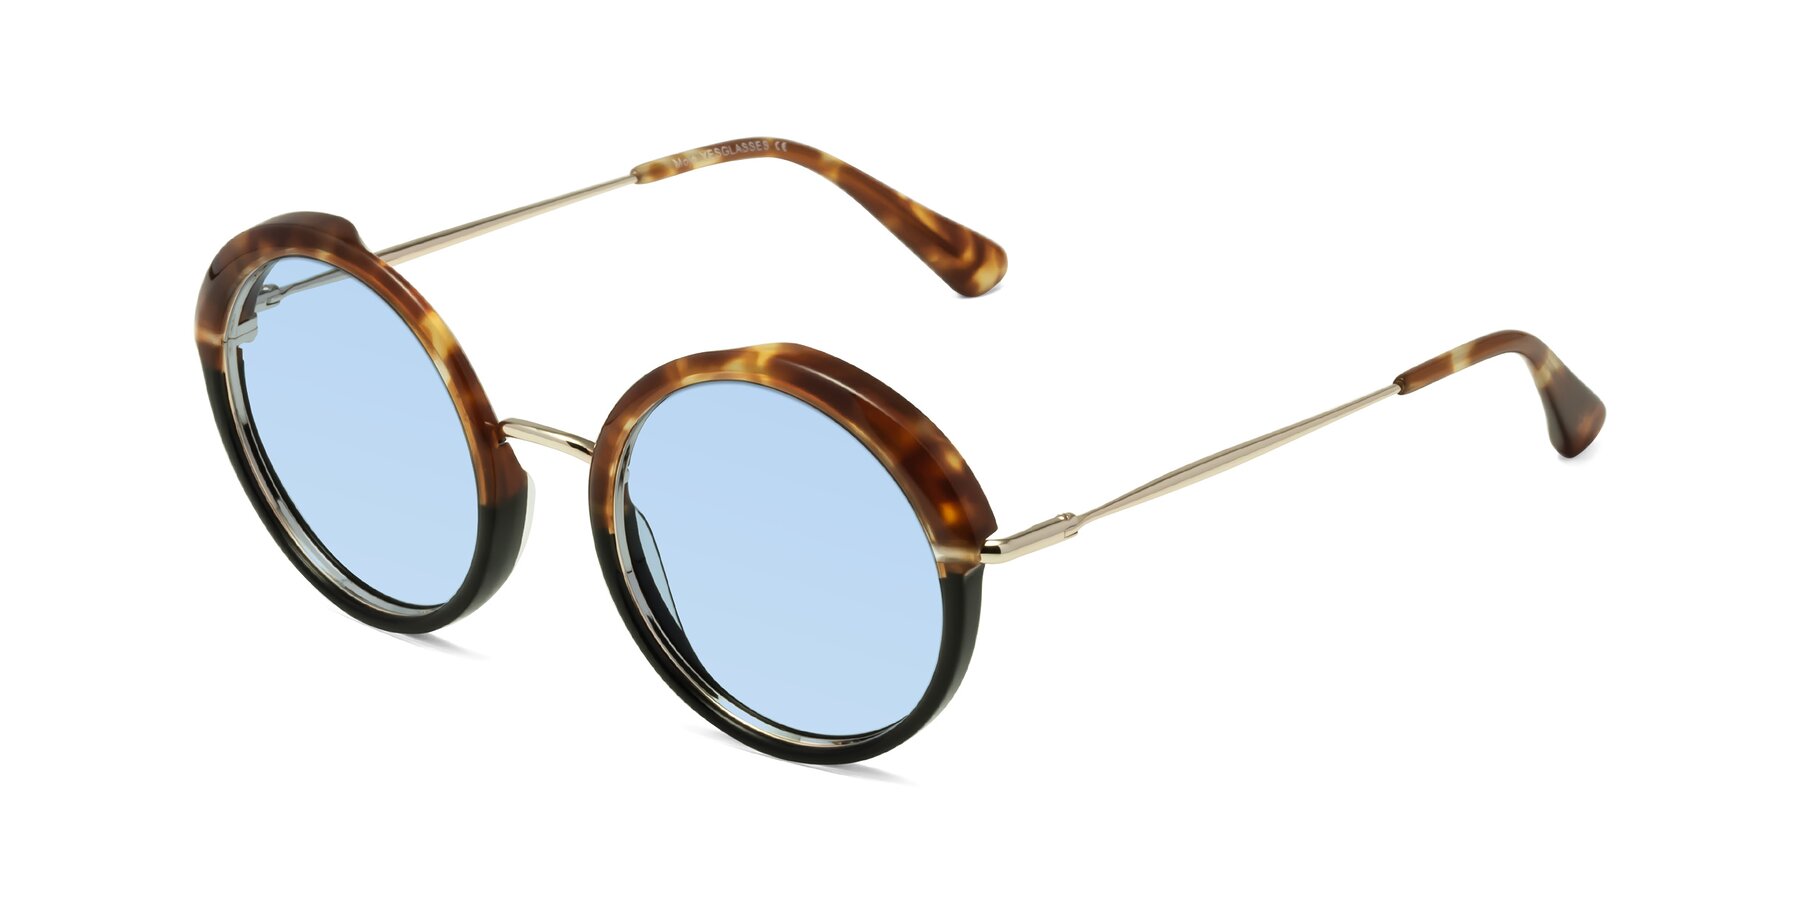 Angle of Mojo in Tortoise-Black with Light Blue Tinted Lenses